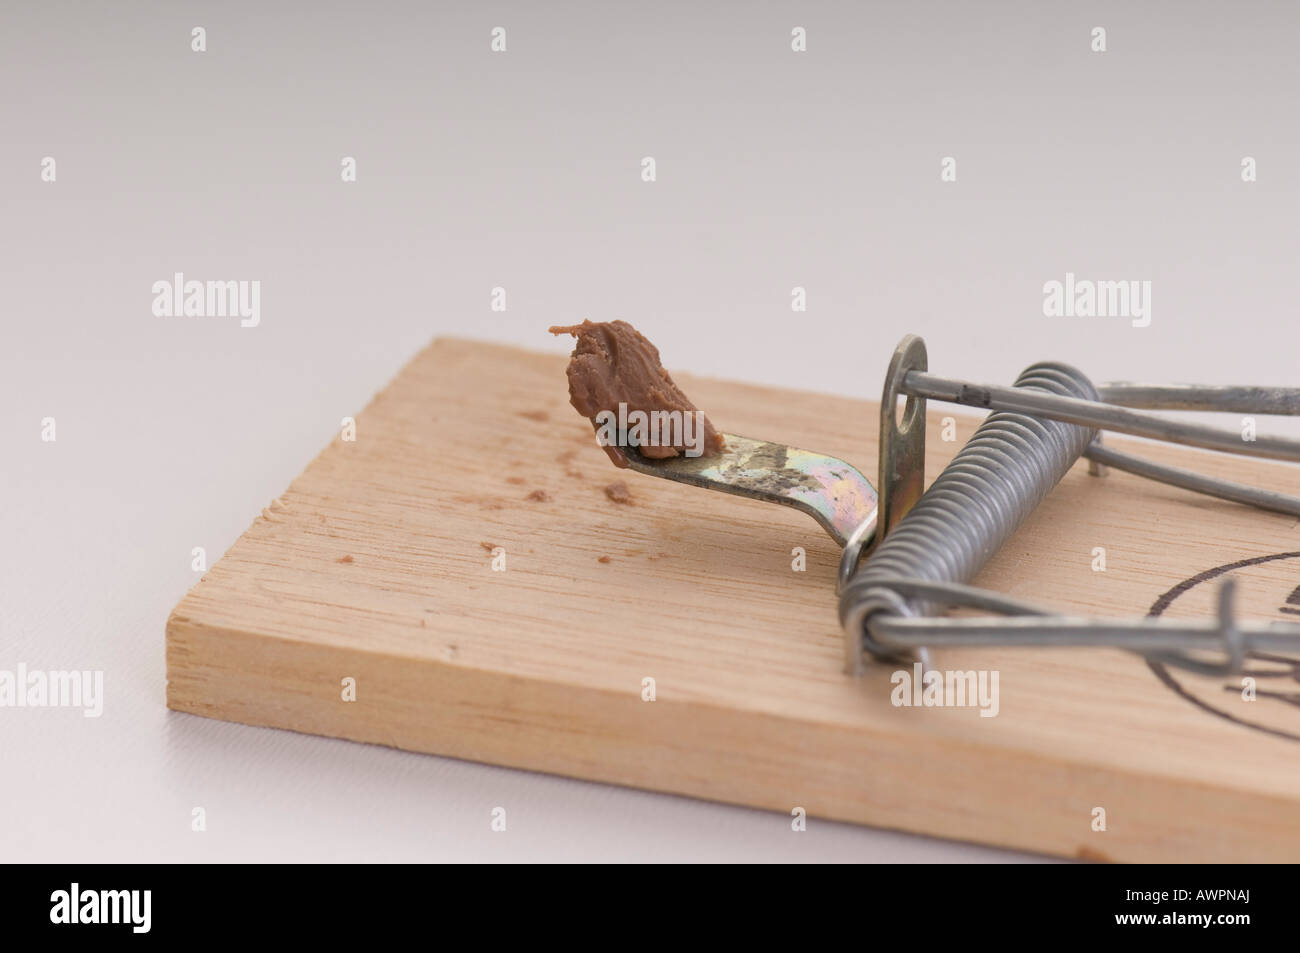 Baited wooden mousetrap Stock Photo